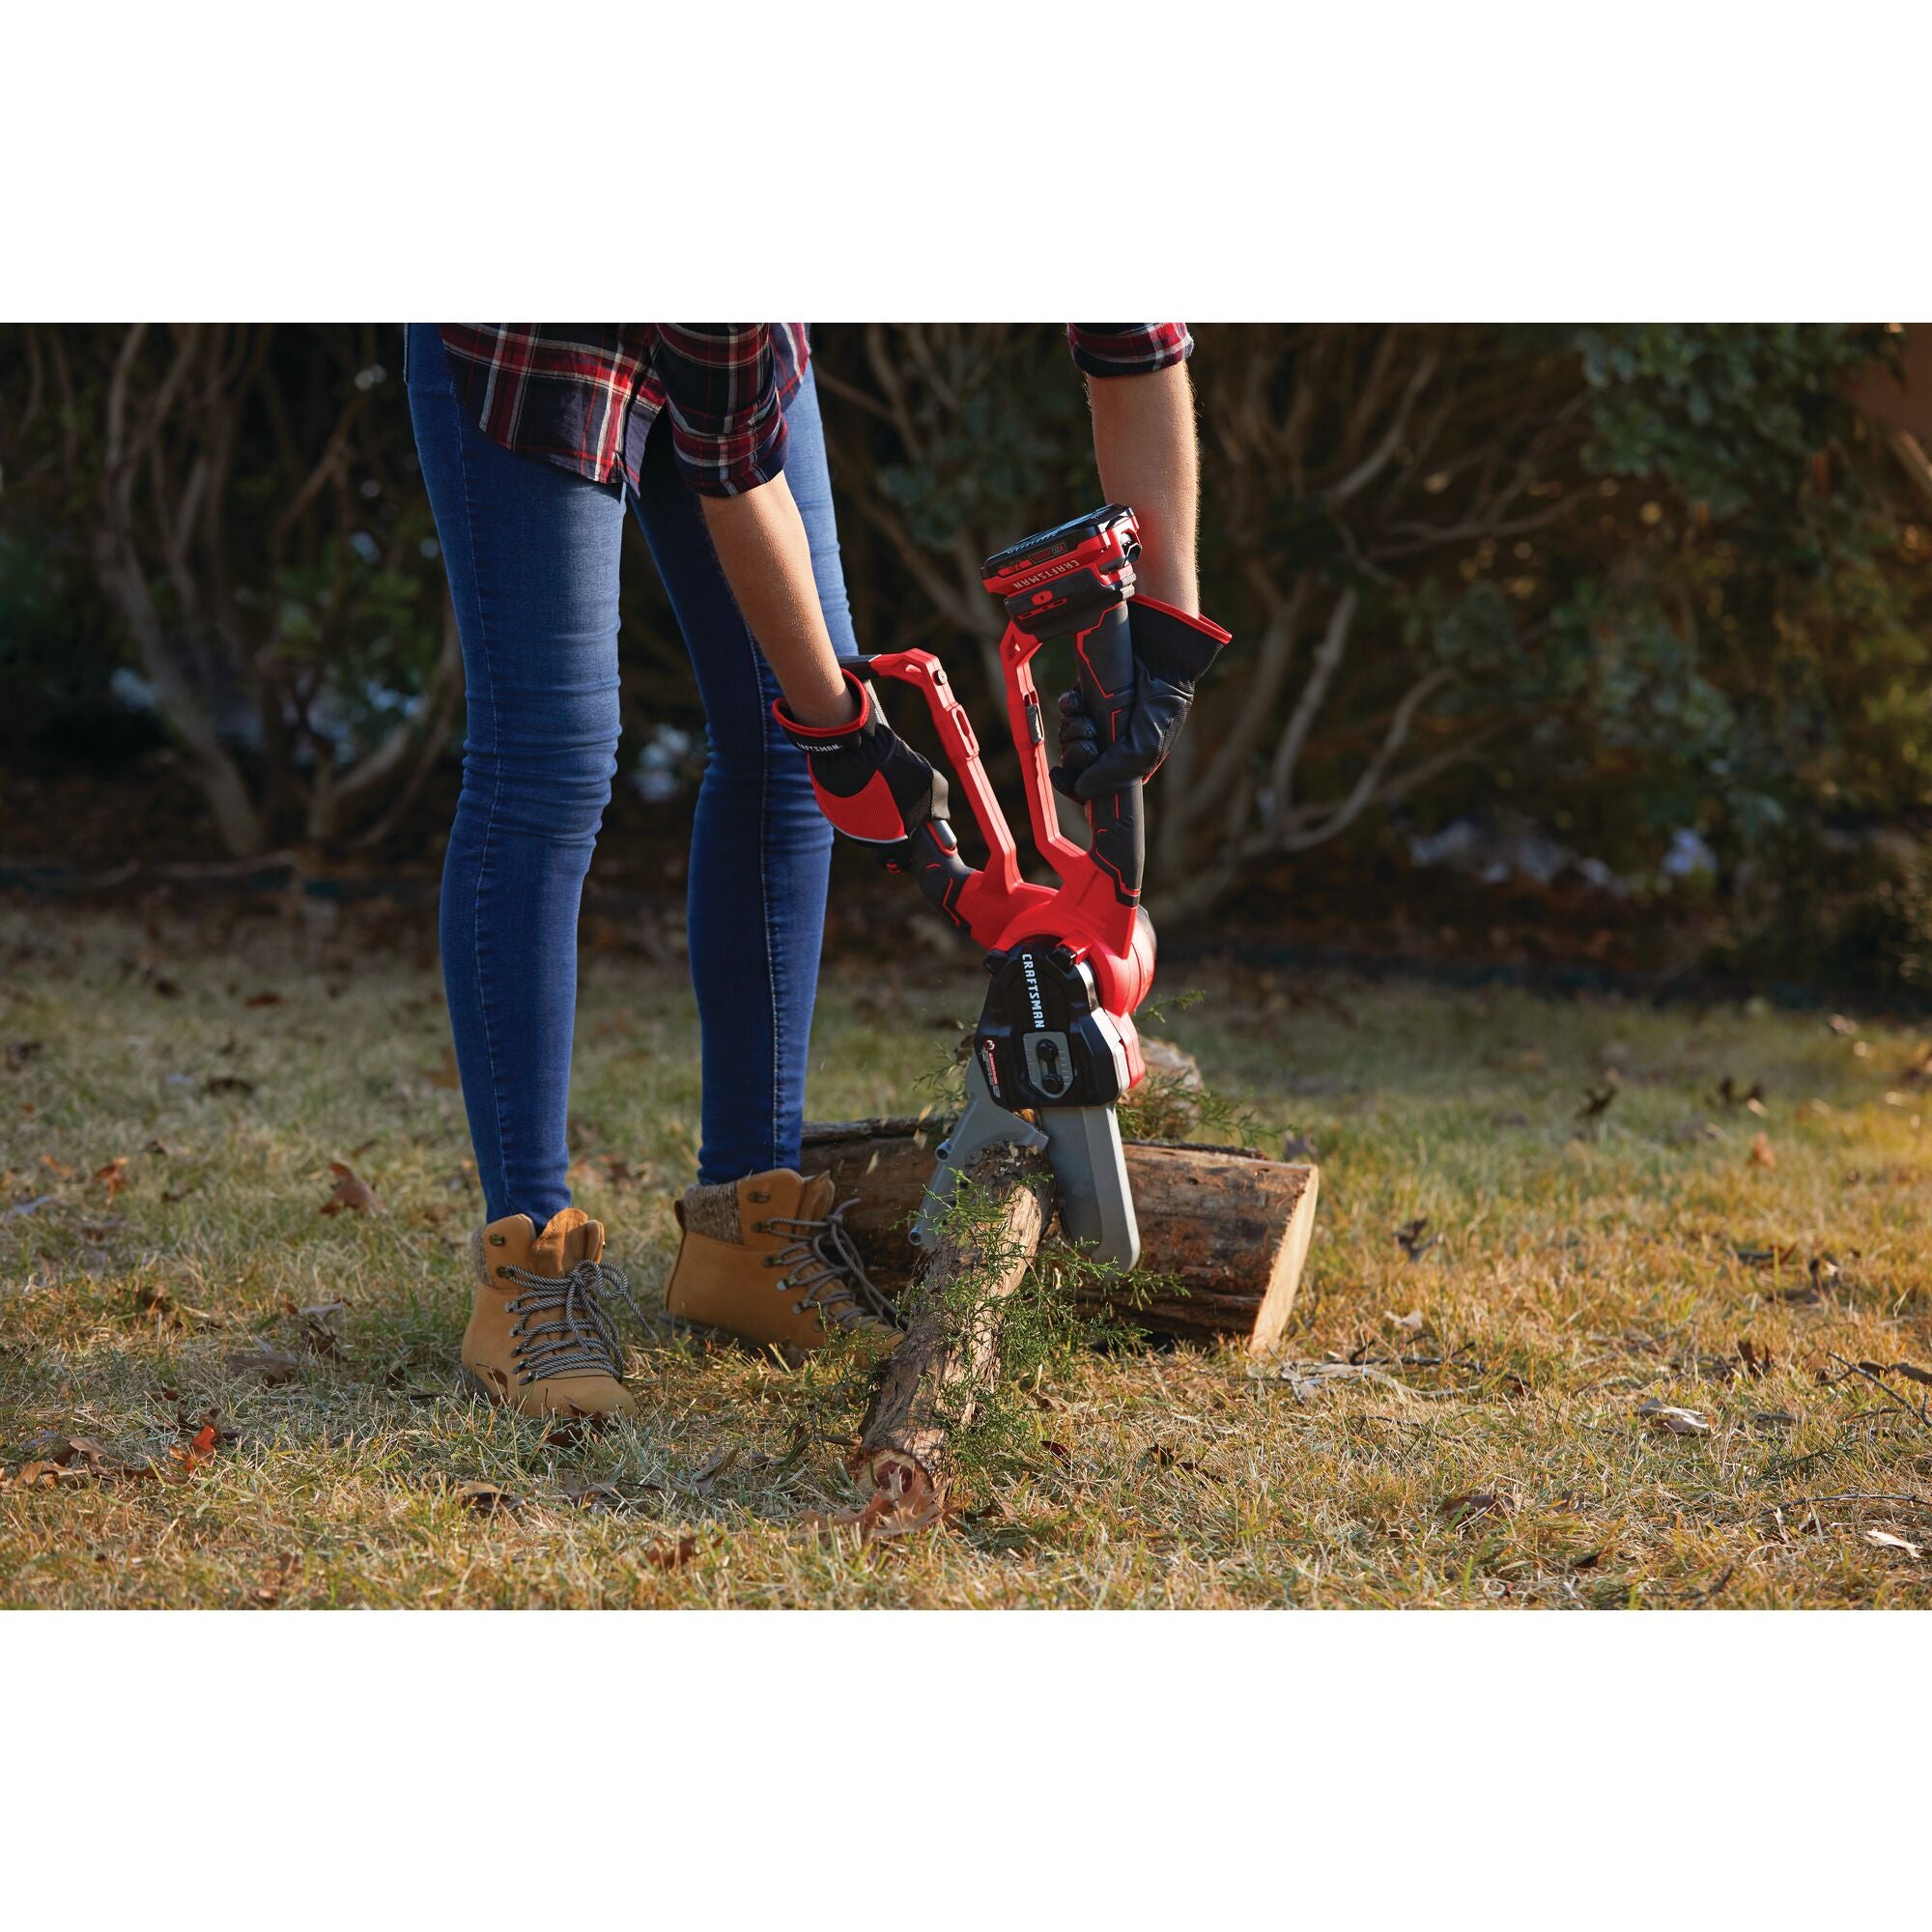 V20* 6-in. Cordless Compact Chainsaw Lopper Kit (2.0Ah) | CRAFTSMAN